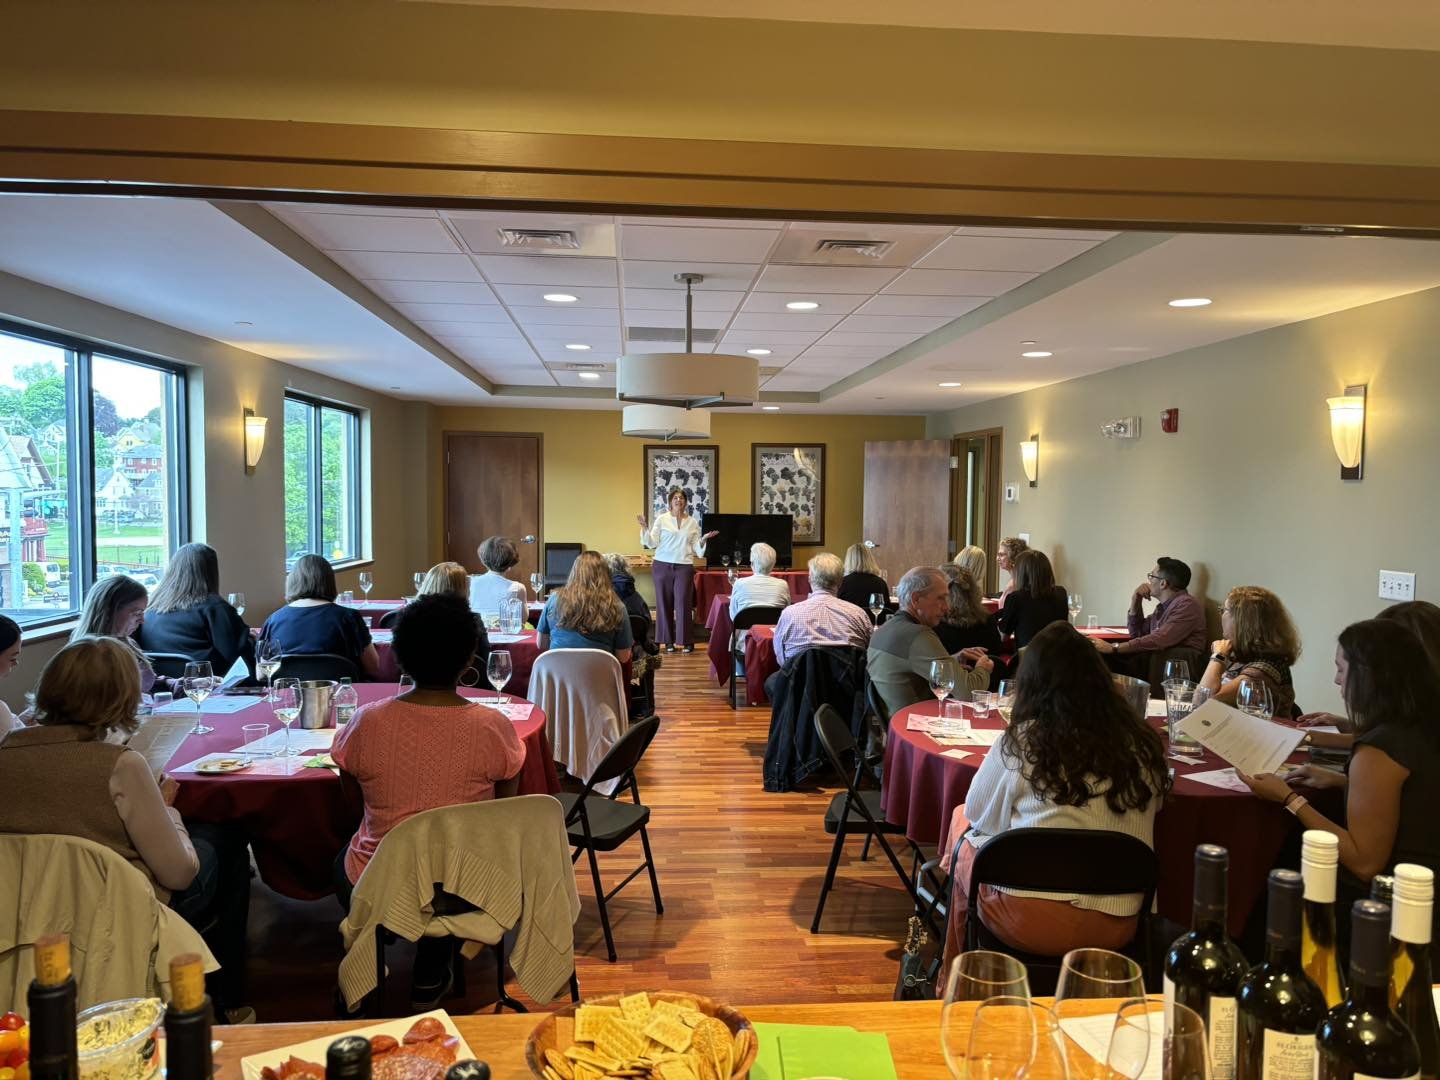 Such a great time getting to know some prospective volunteers! Thank you to Christine and staff at Blanchards - West Roxbury for hosting a delicious and informative wine tasting for us tonight. It was really wonderful to get to know so many people in